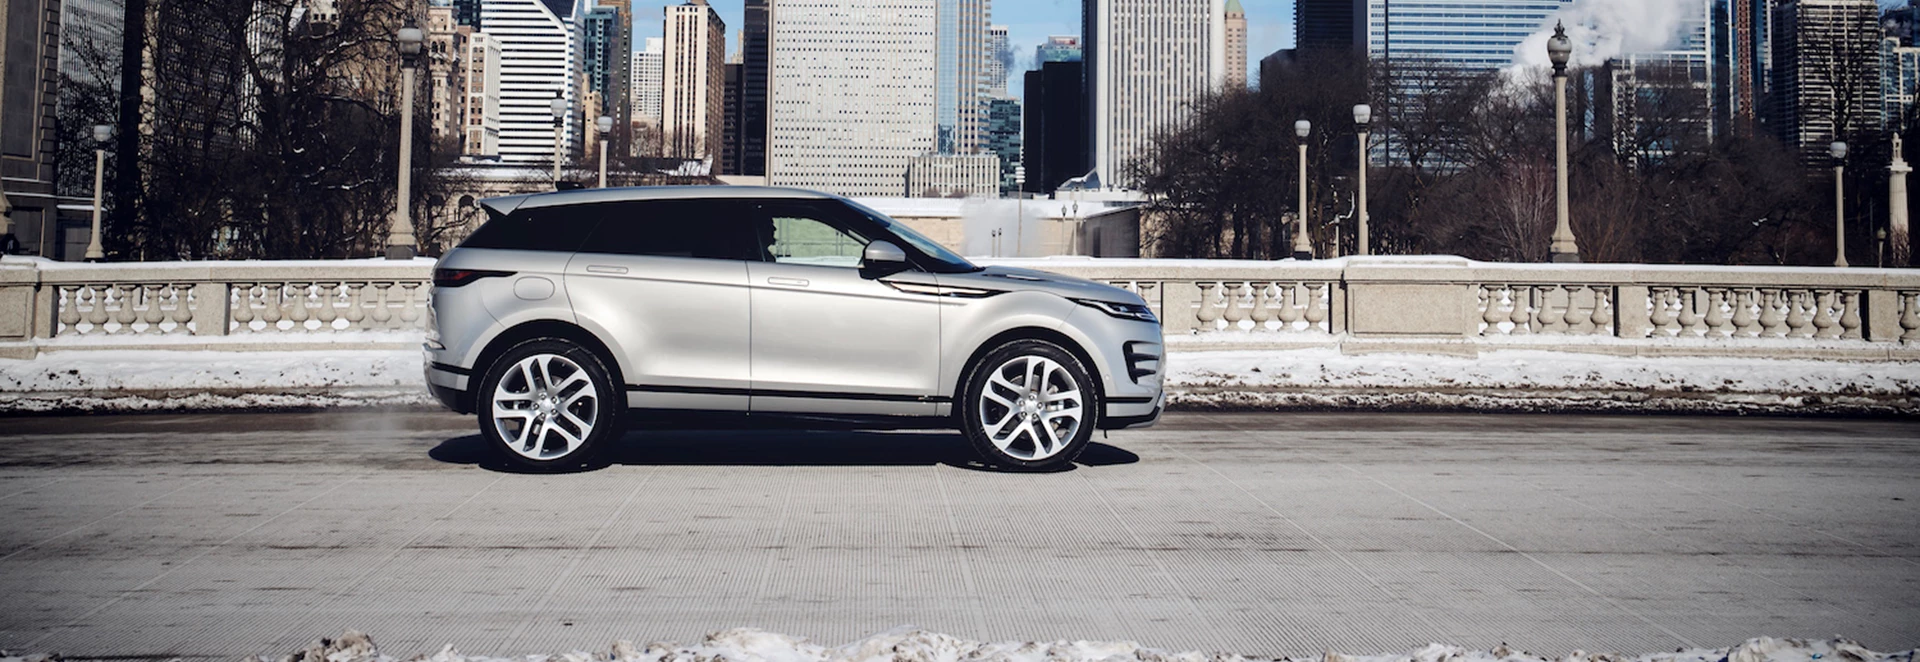 Buyer’s Guide to the 2019 Range Rover Evoque